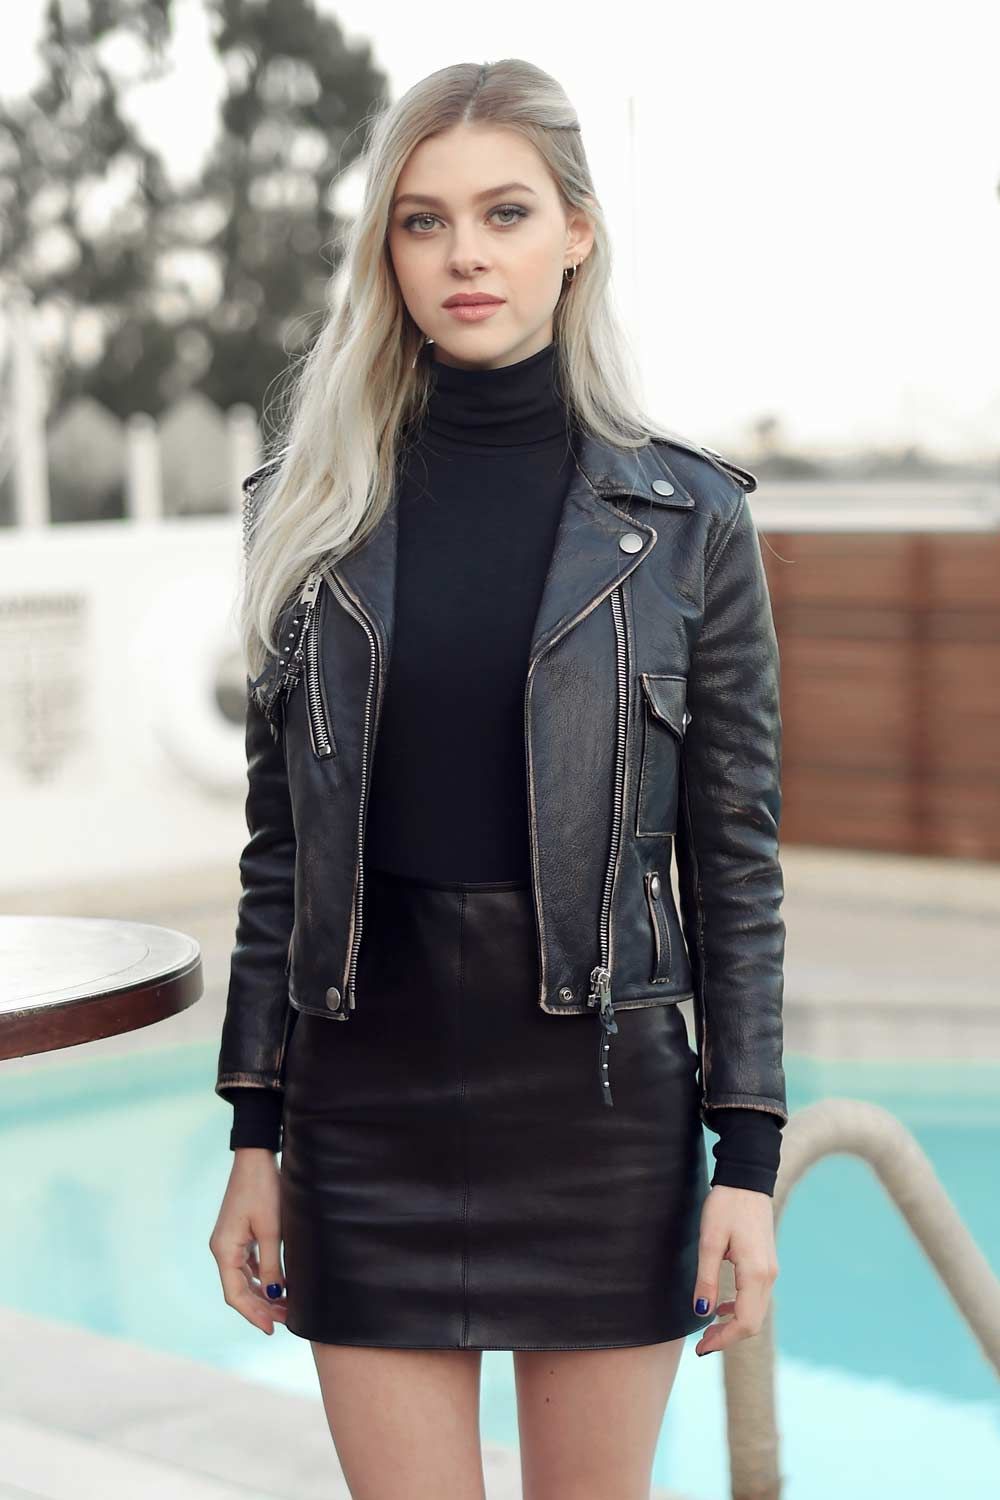 Leather jacket and skirt outfit